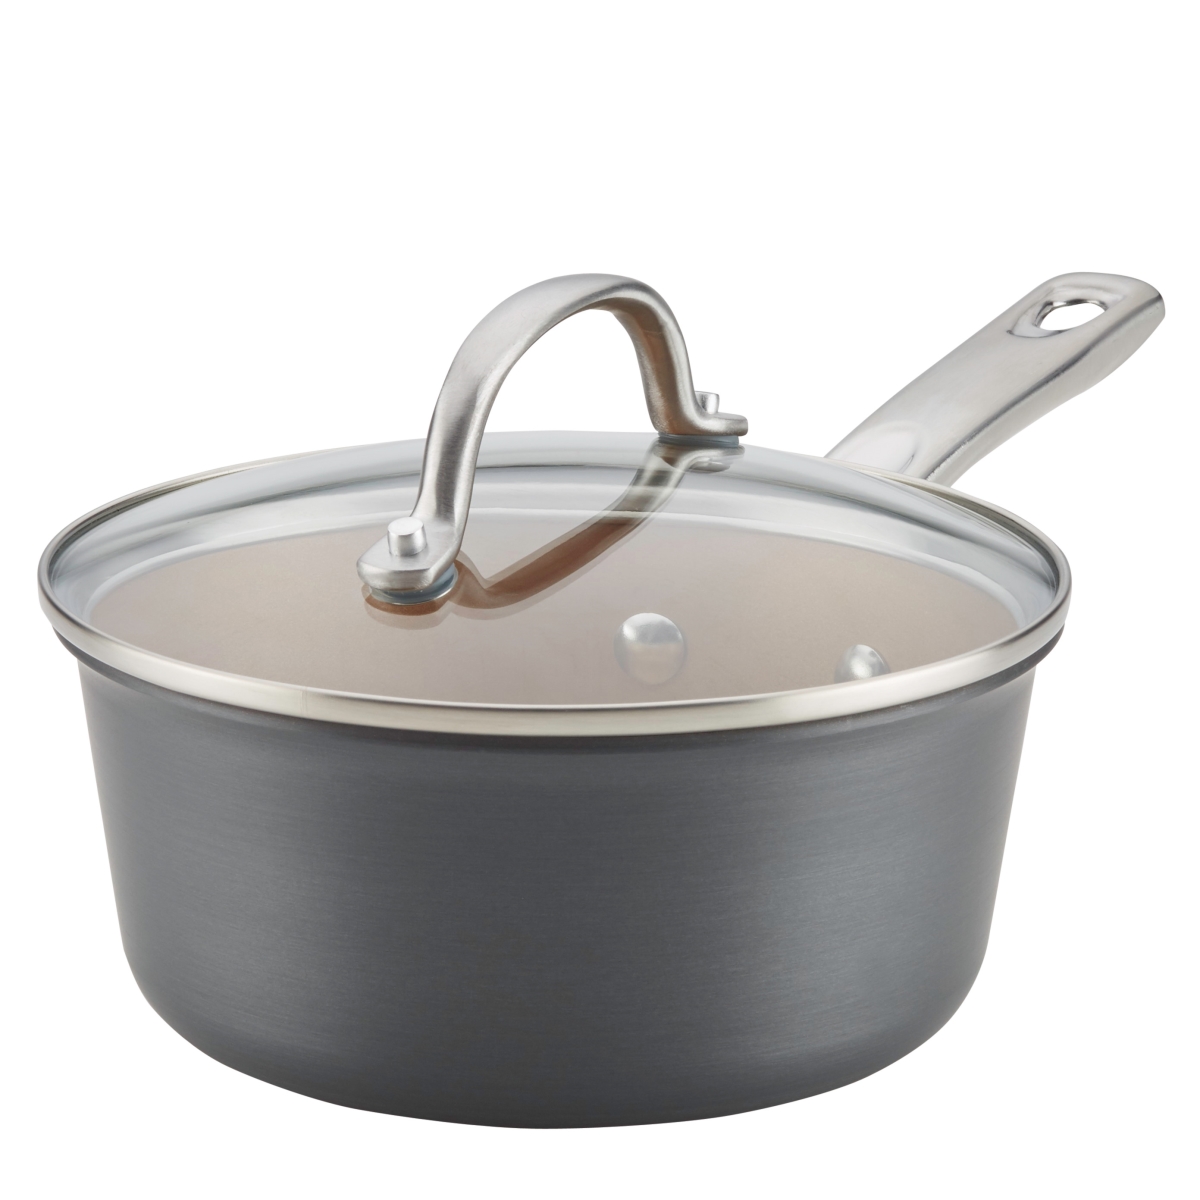 80139 Hard-anodized Nonstick Covered Saucepan, 2 Qt. - Gray